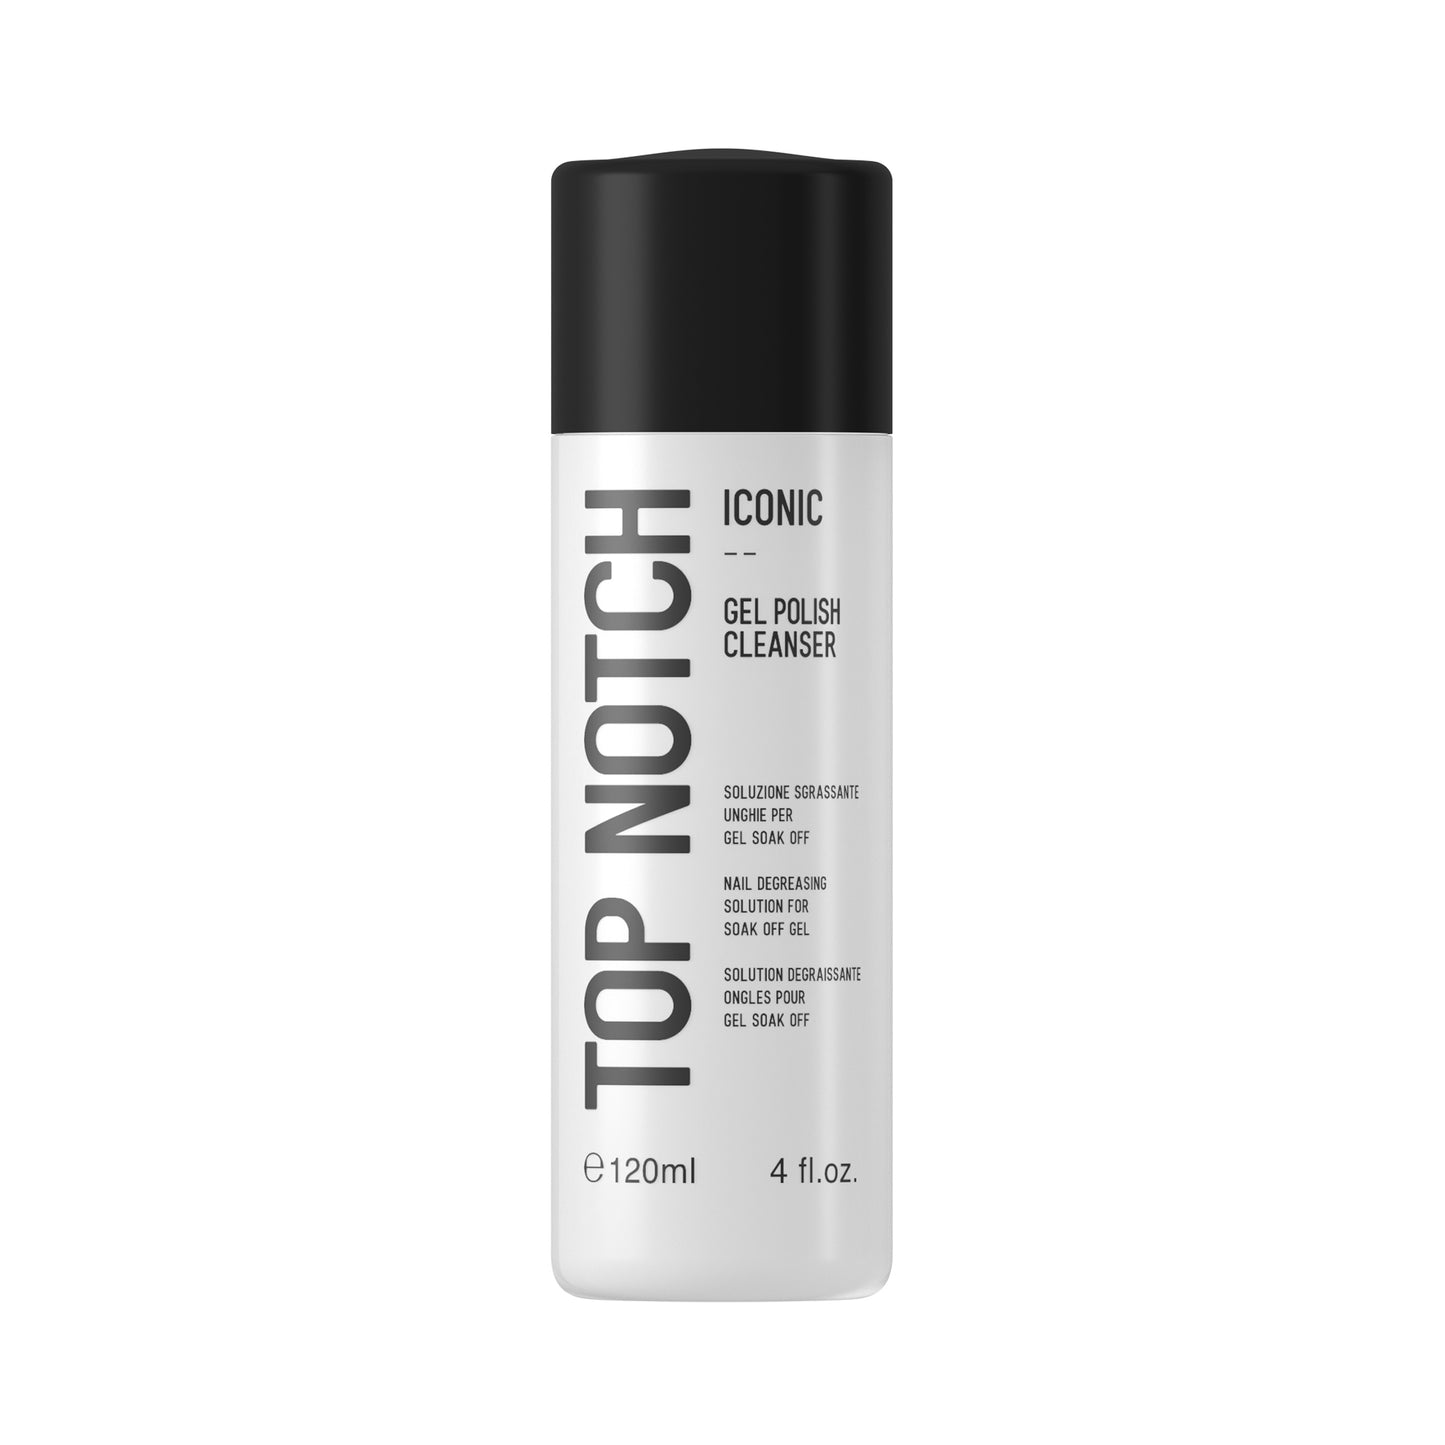 Mesauda - Top Notch Iconic - Cleanser 120ml